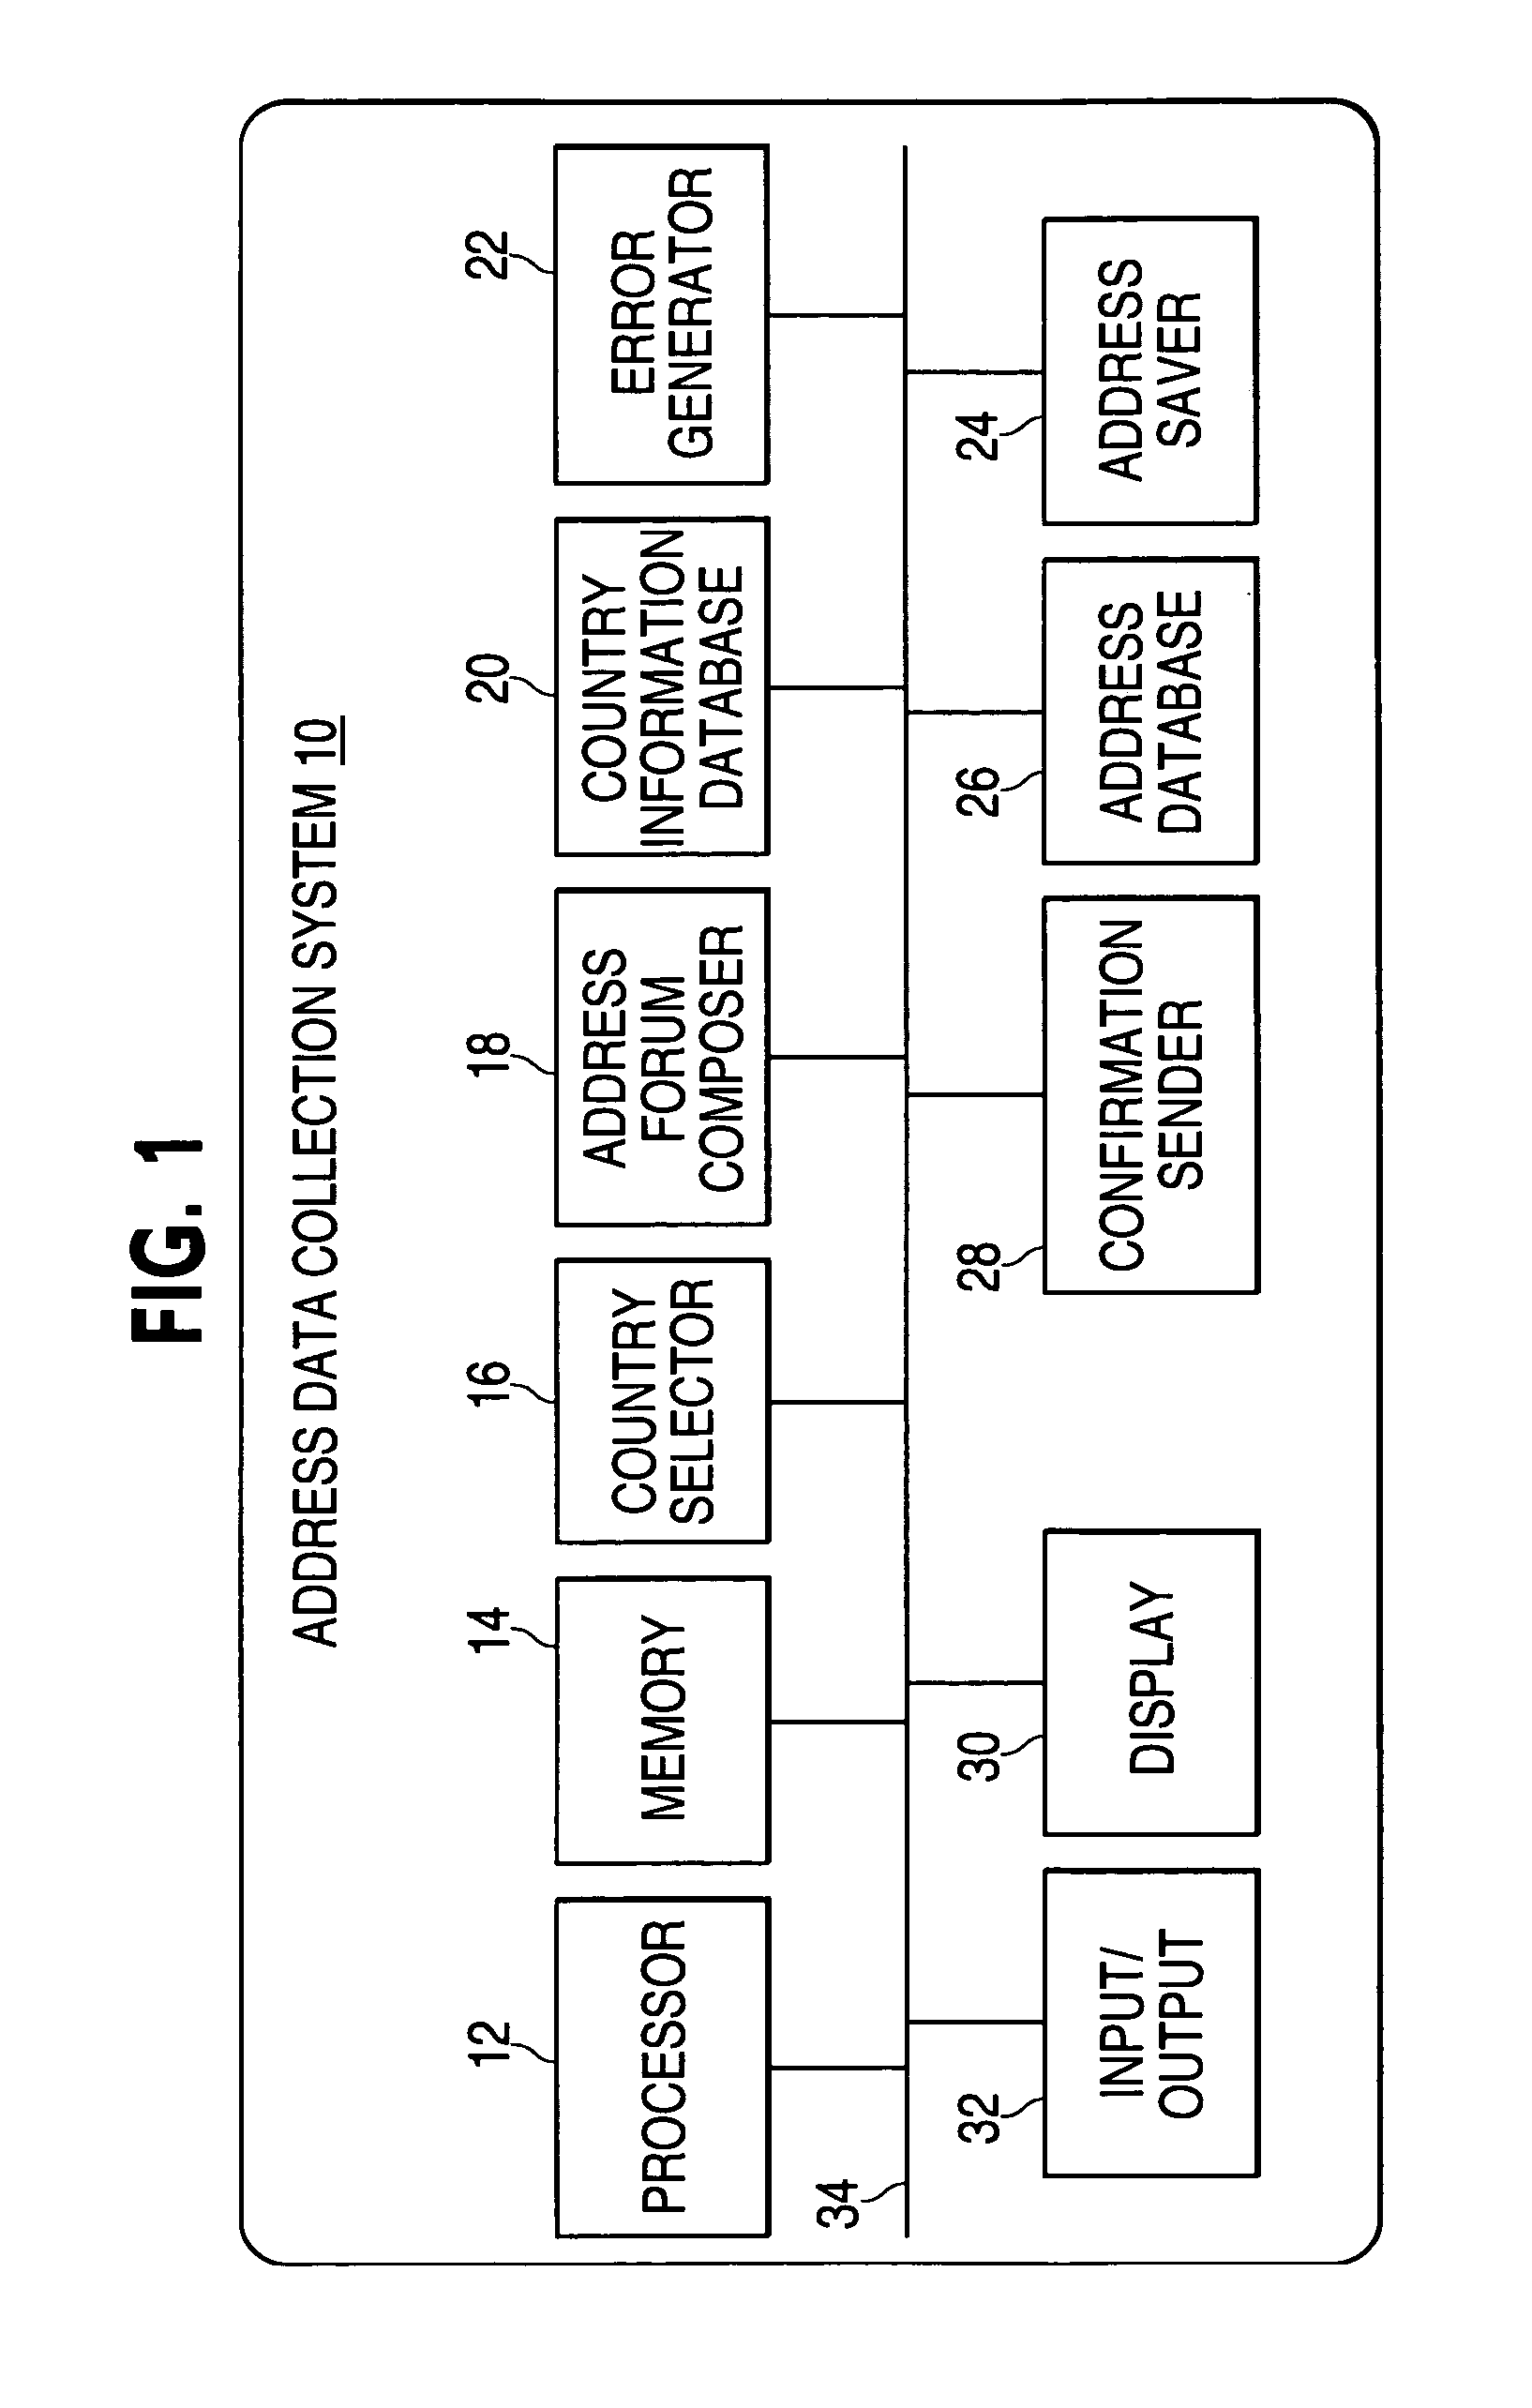 Address data collection and formatting apparatus and method for worldwide address formats